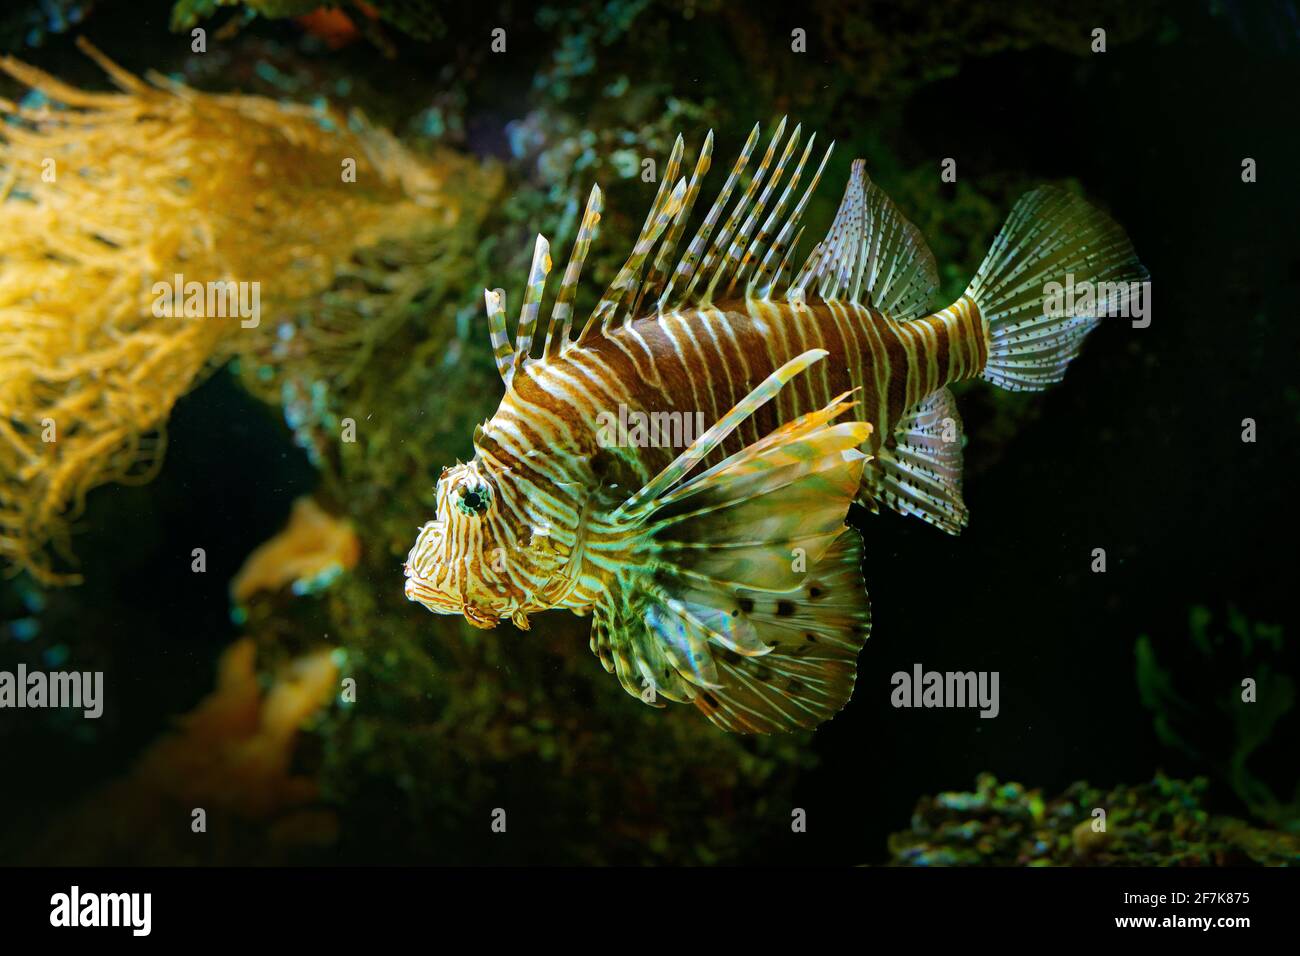 Pterois volitans, Red Lionfish, danger poison fish in the sea water. Lion fish in the nature ocean habitat. Stock Photo